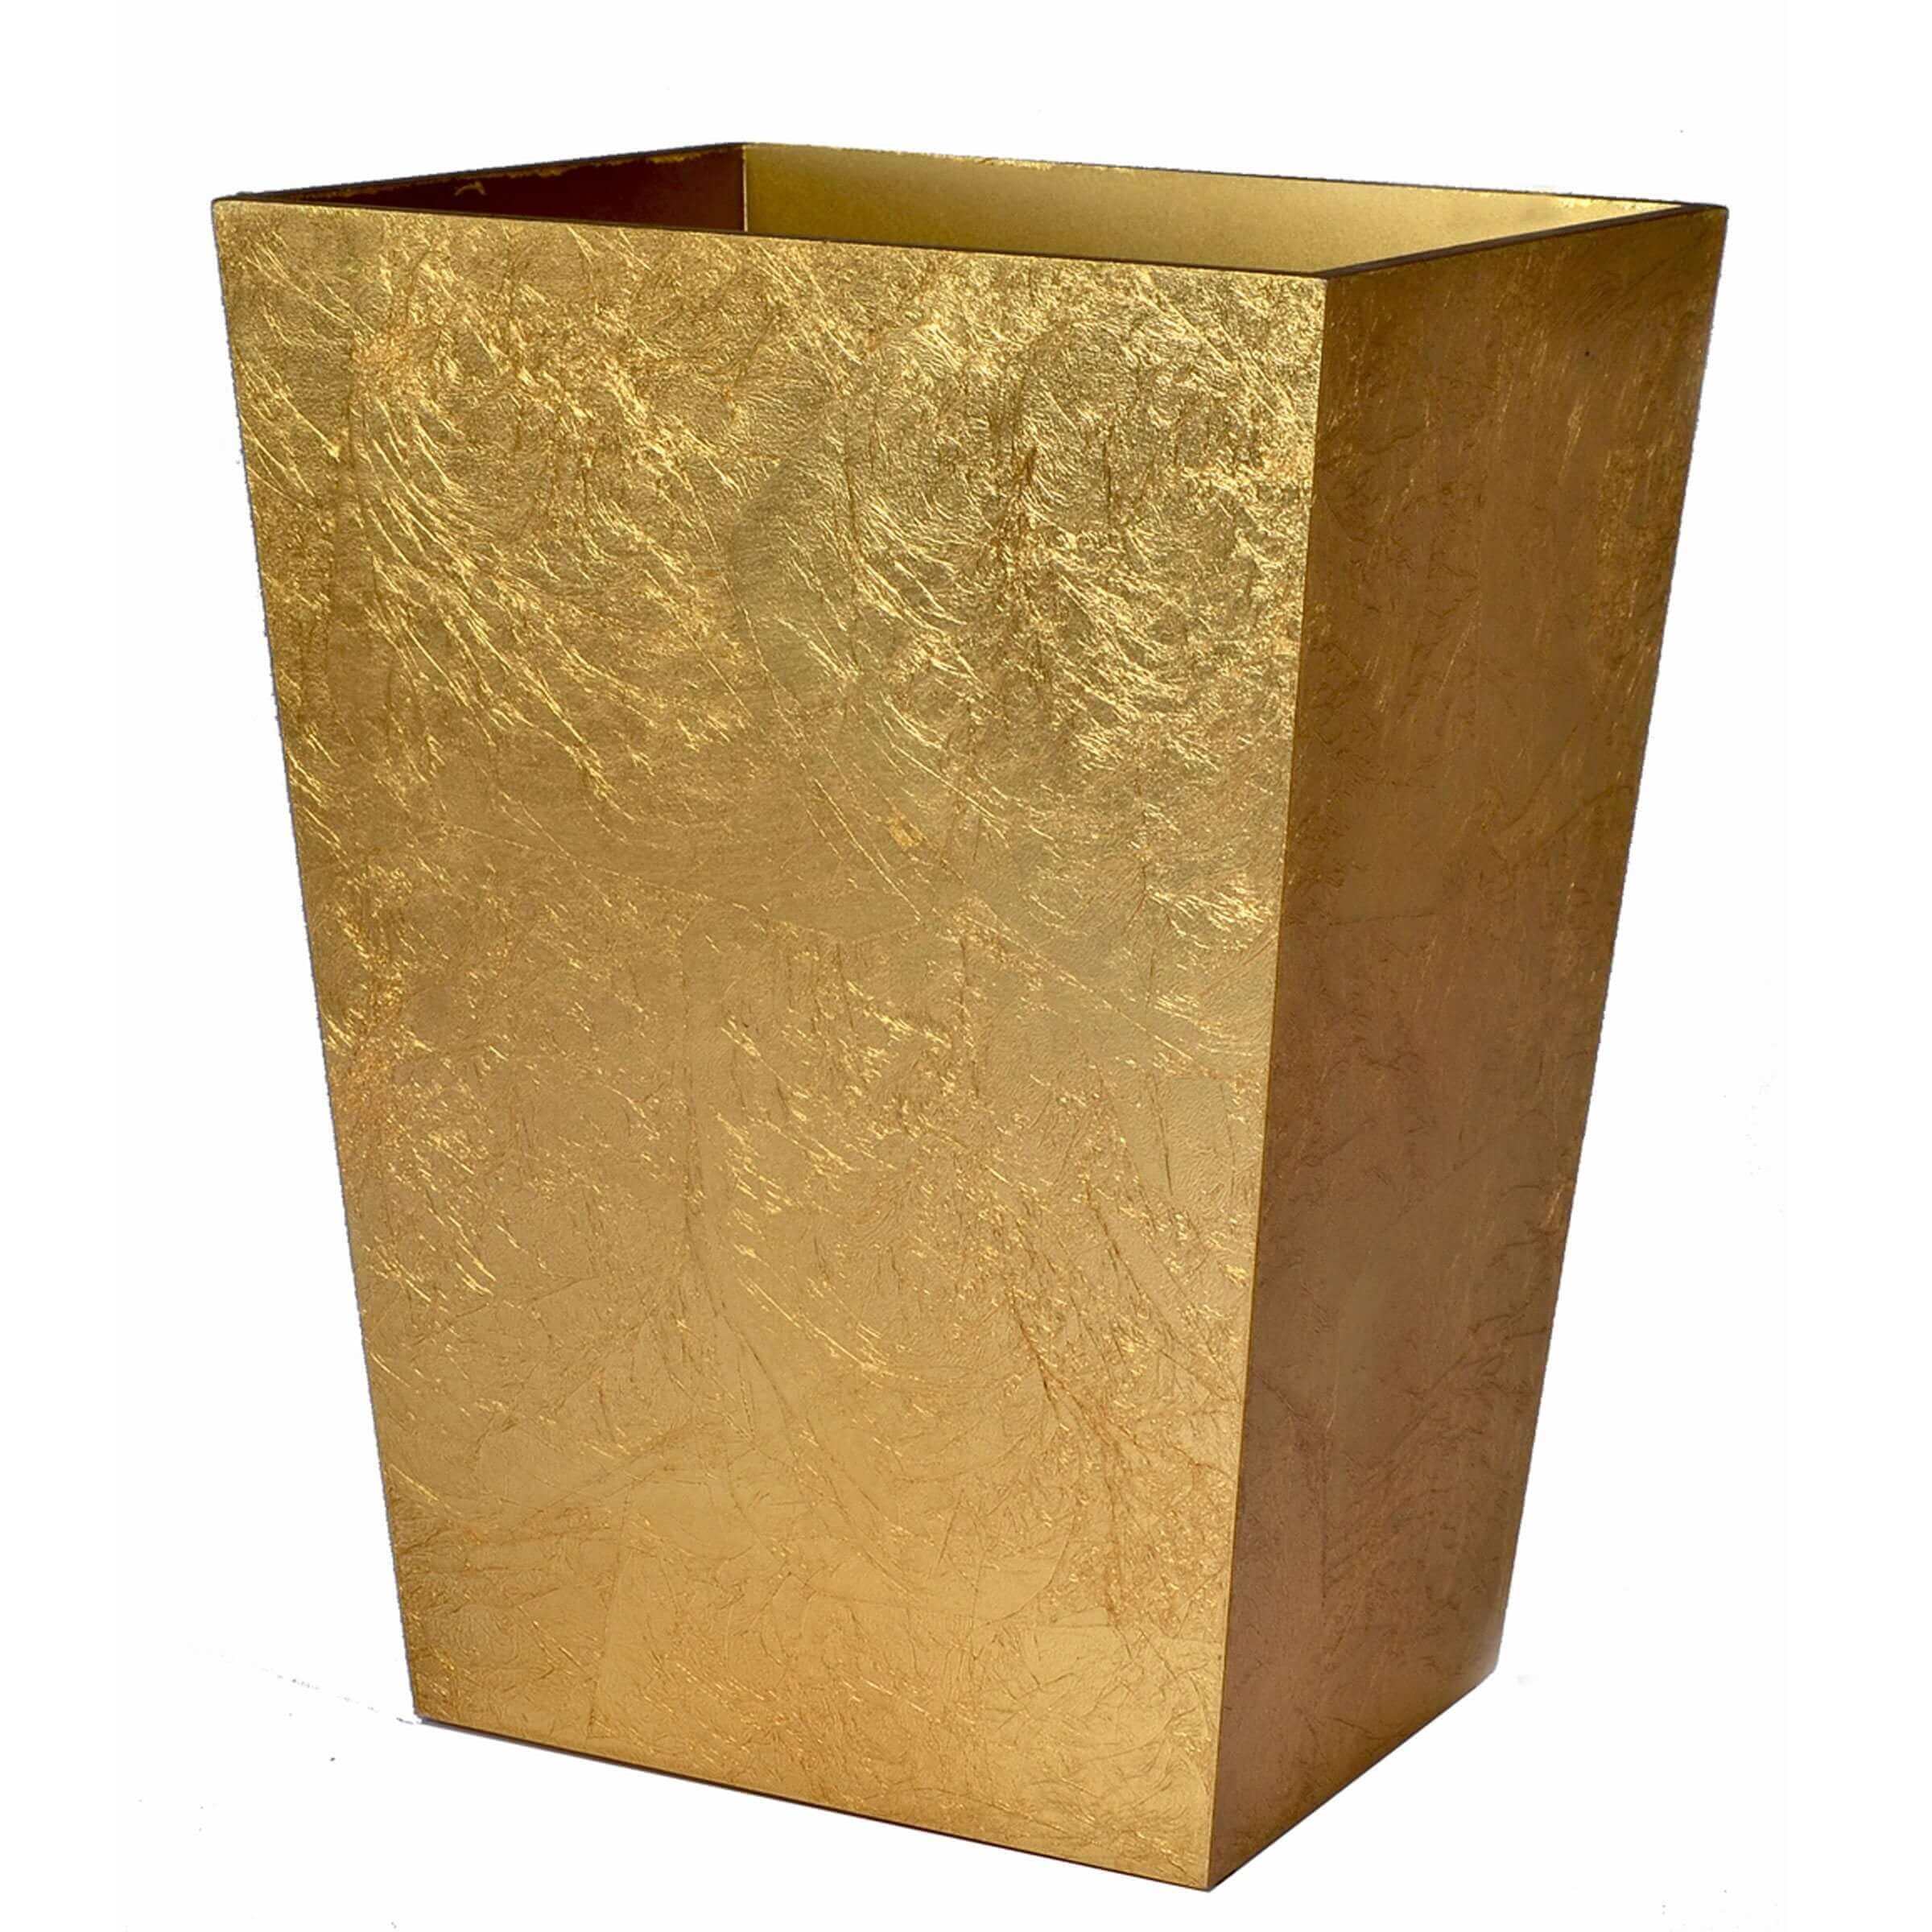 Mike + Ally - EOS Gold Wastebasket - 32061G - Gold - 